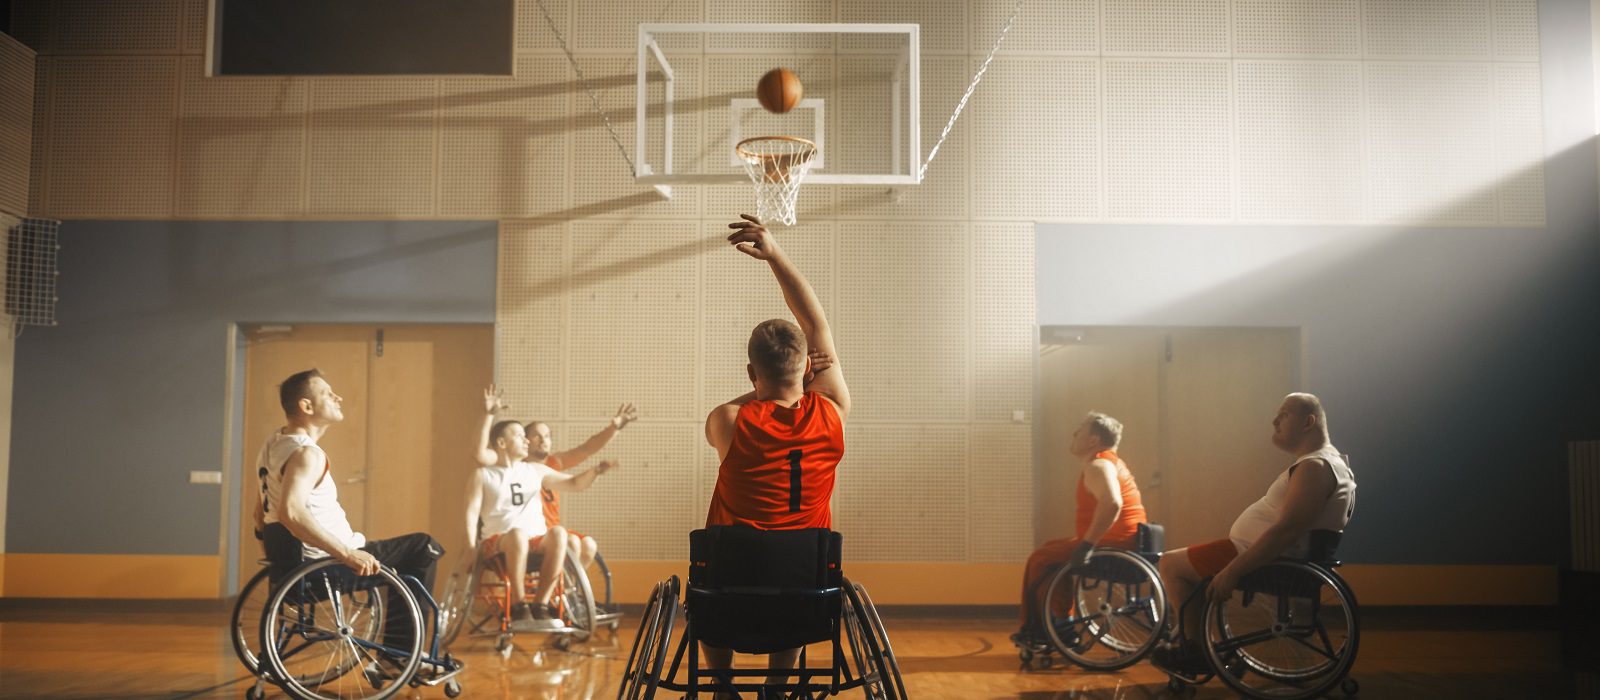 Wheelchair Basketball Game: Professional Players Competing, Dribbling Ball, Passing. Player Successfully Shooting, Scoring a Goal. Celebration of Determination, Skill, Speed of People with Disability